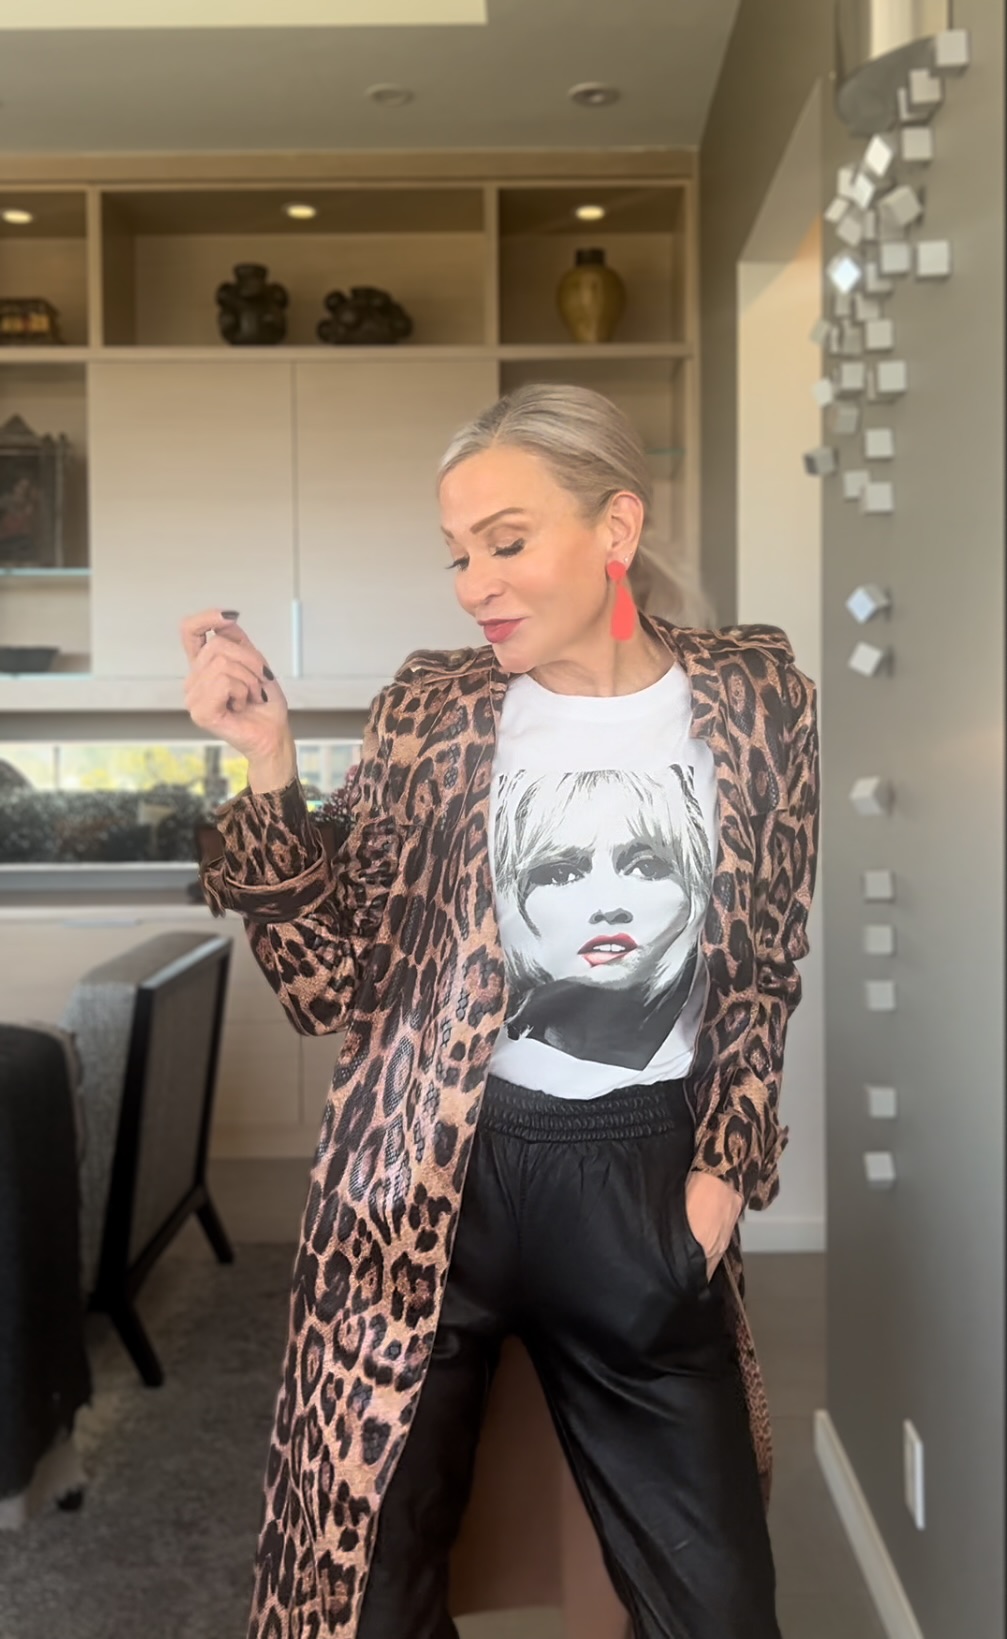 Lifestyle Influencer, jamie lewinger of More Than turquoise wearing Brigitte Bardot graphic tee